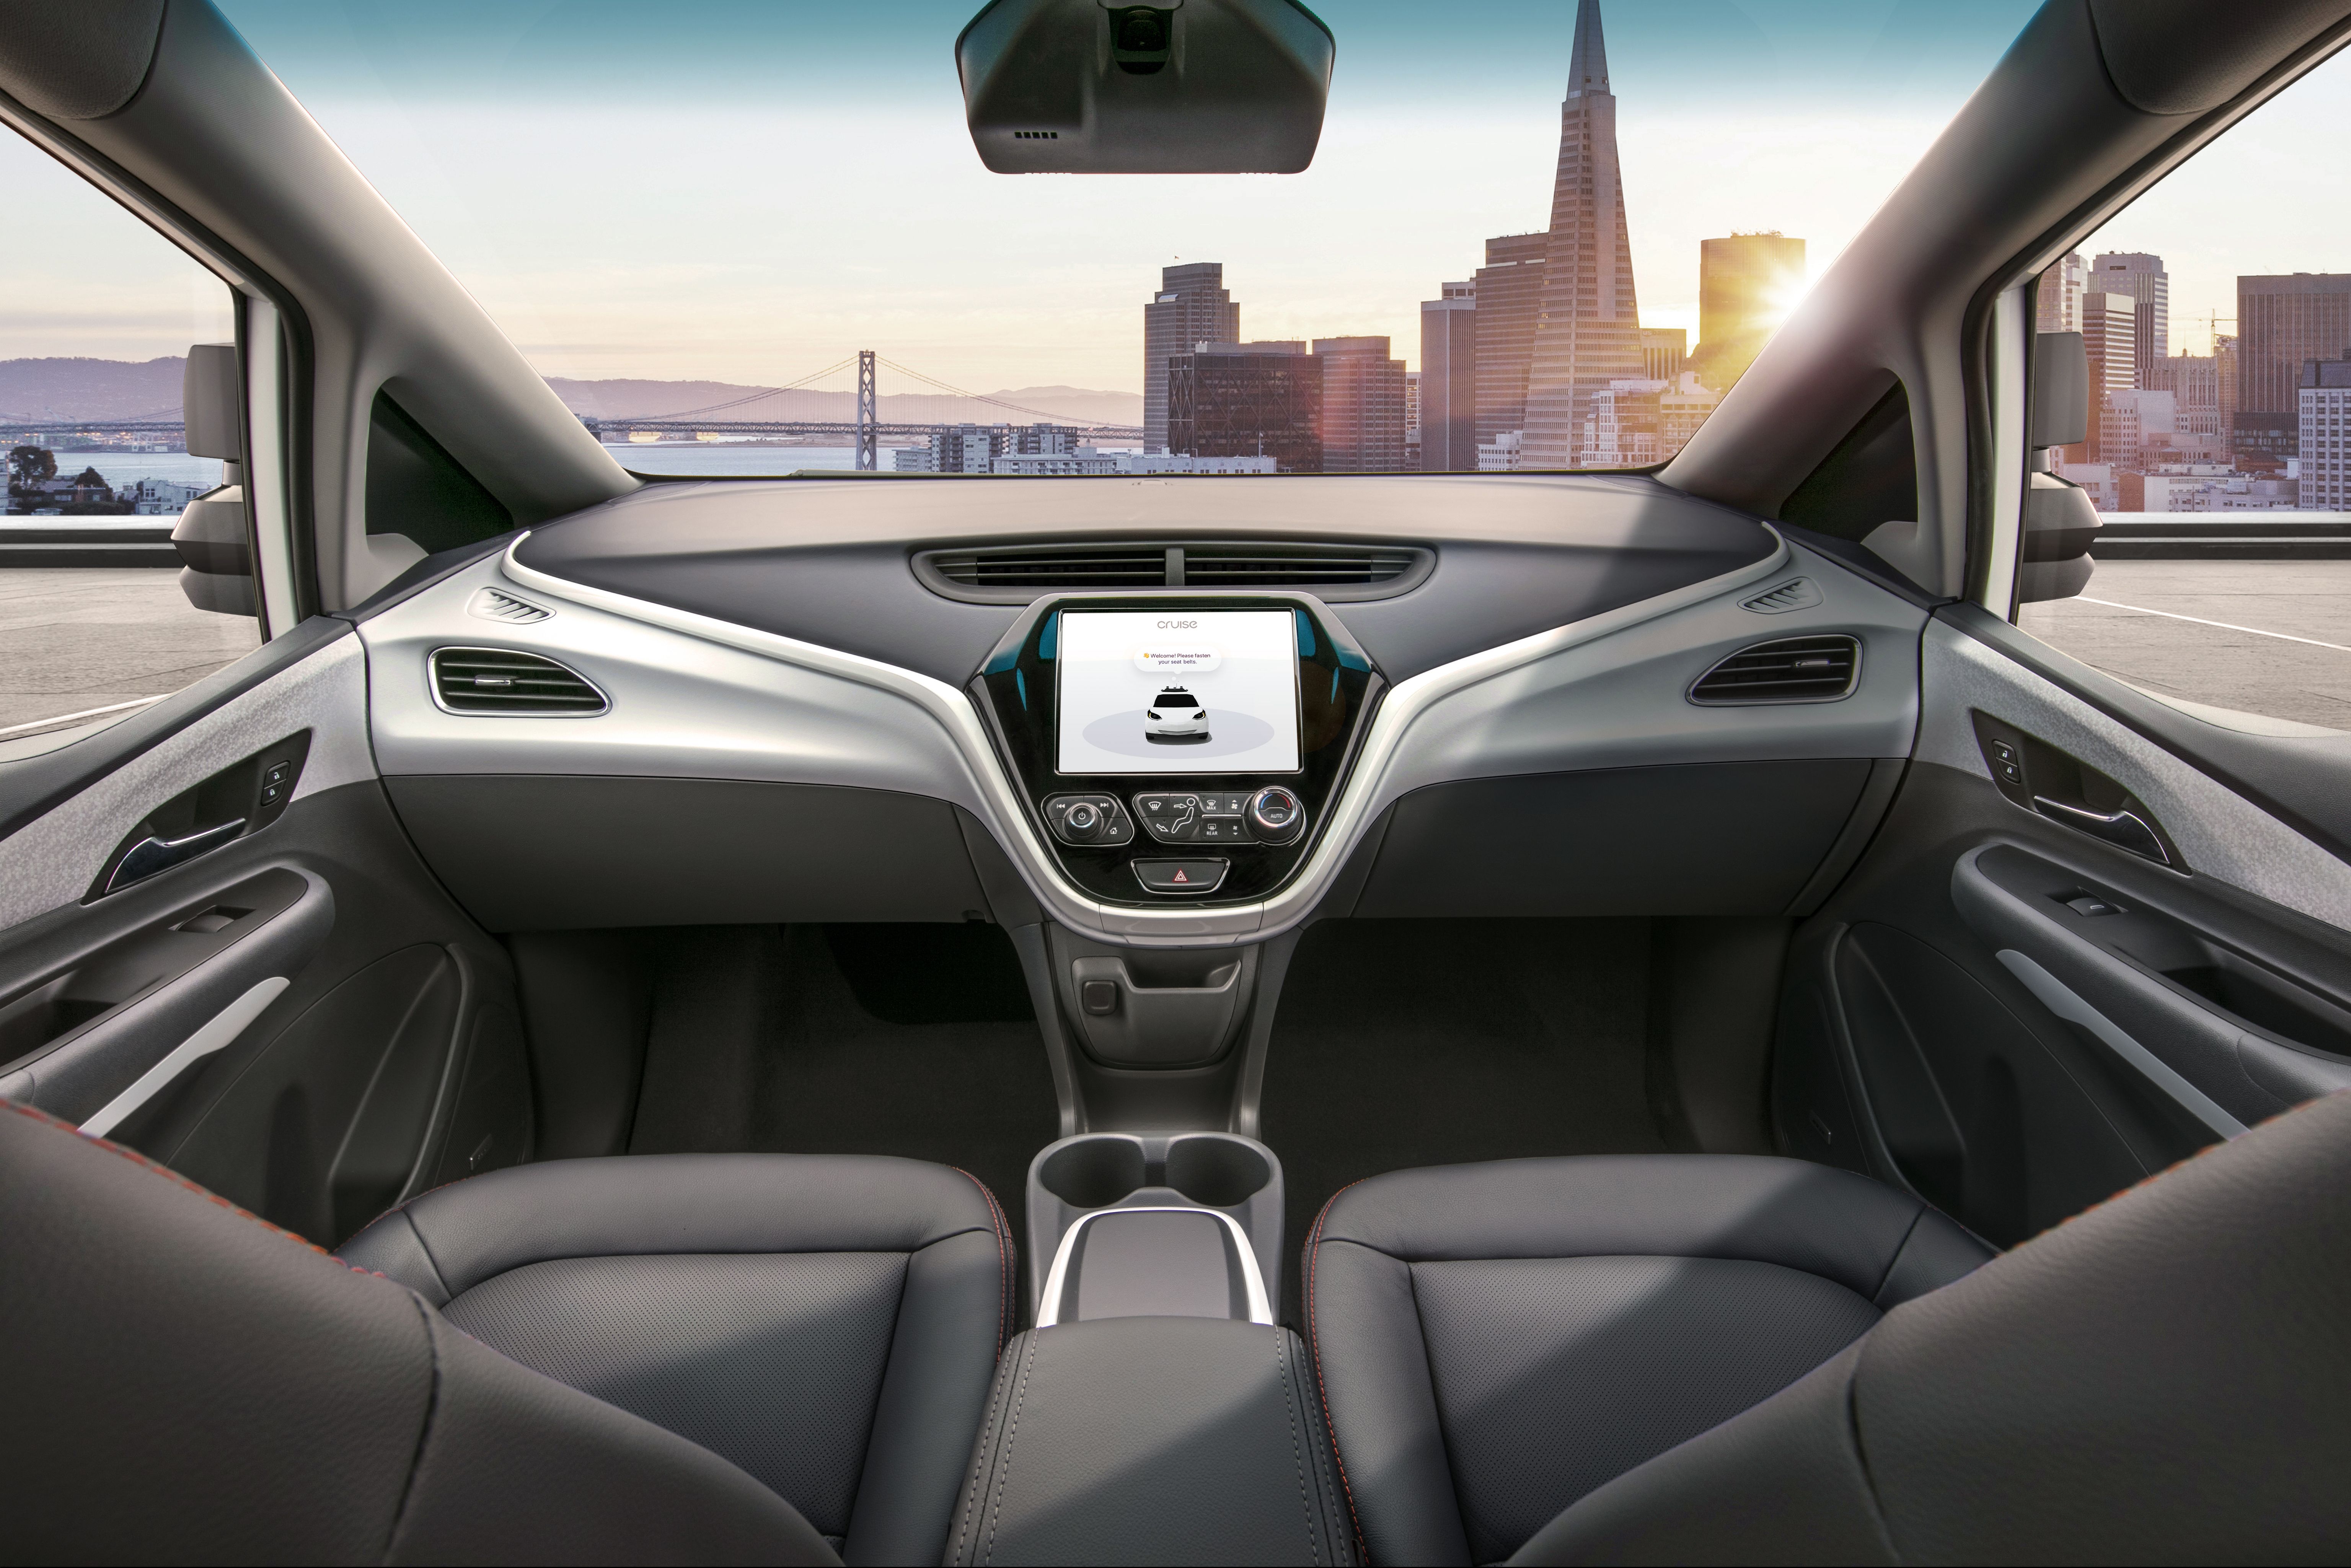 GM and Cruise reveal their fourth-generation, steering wheel-free Cruise AV